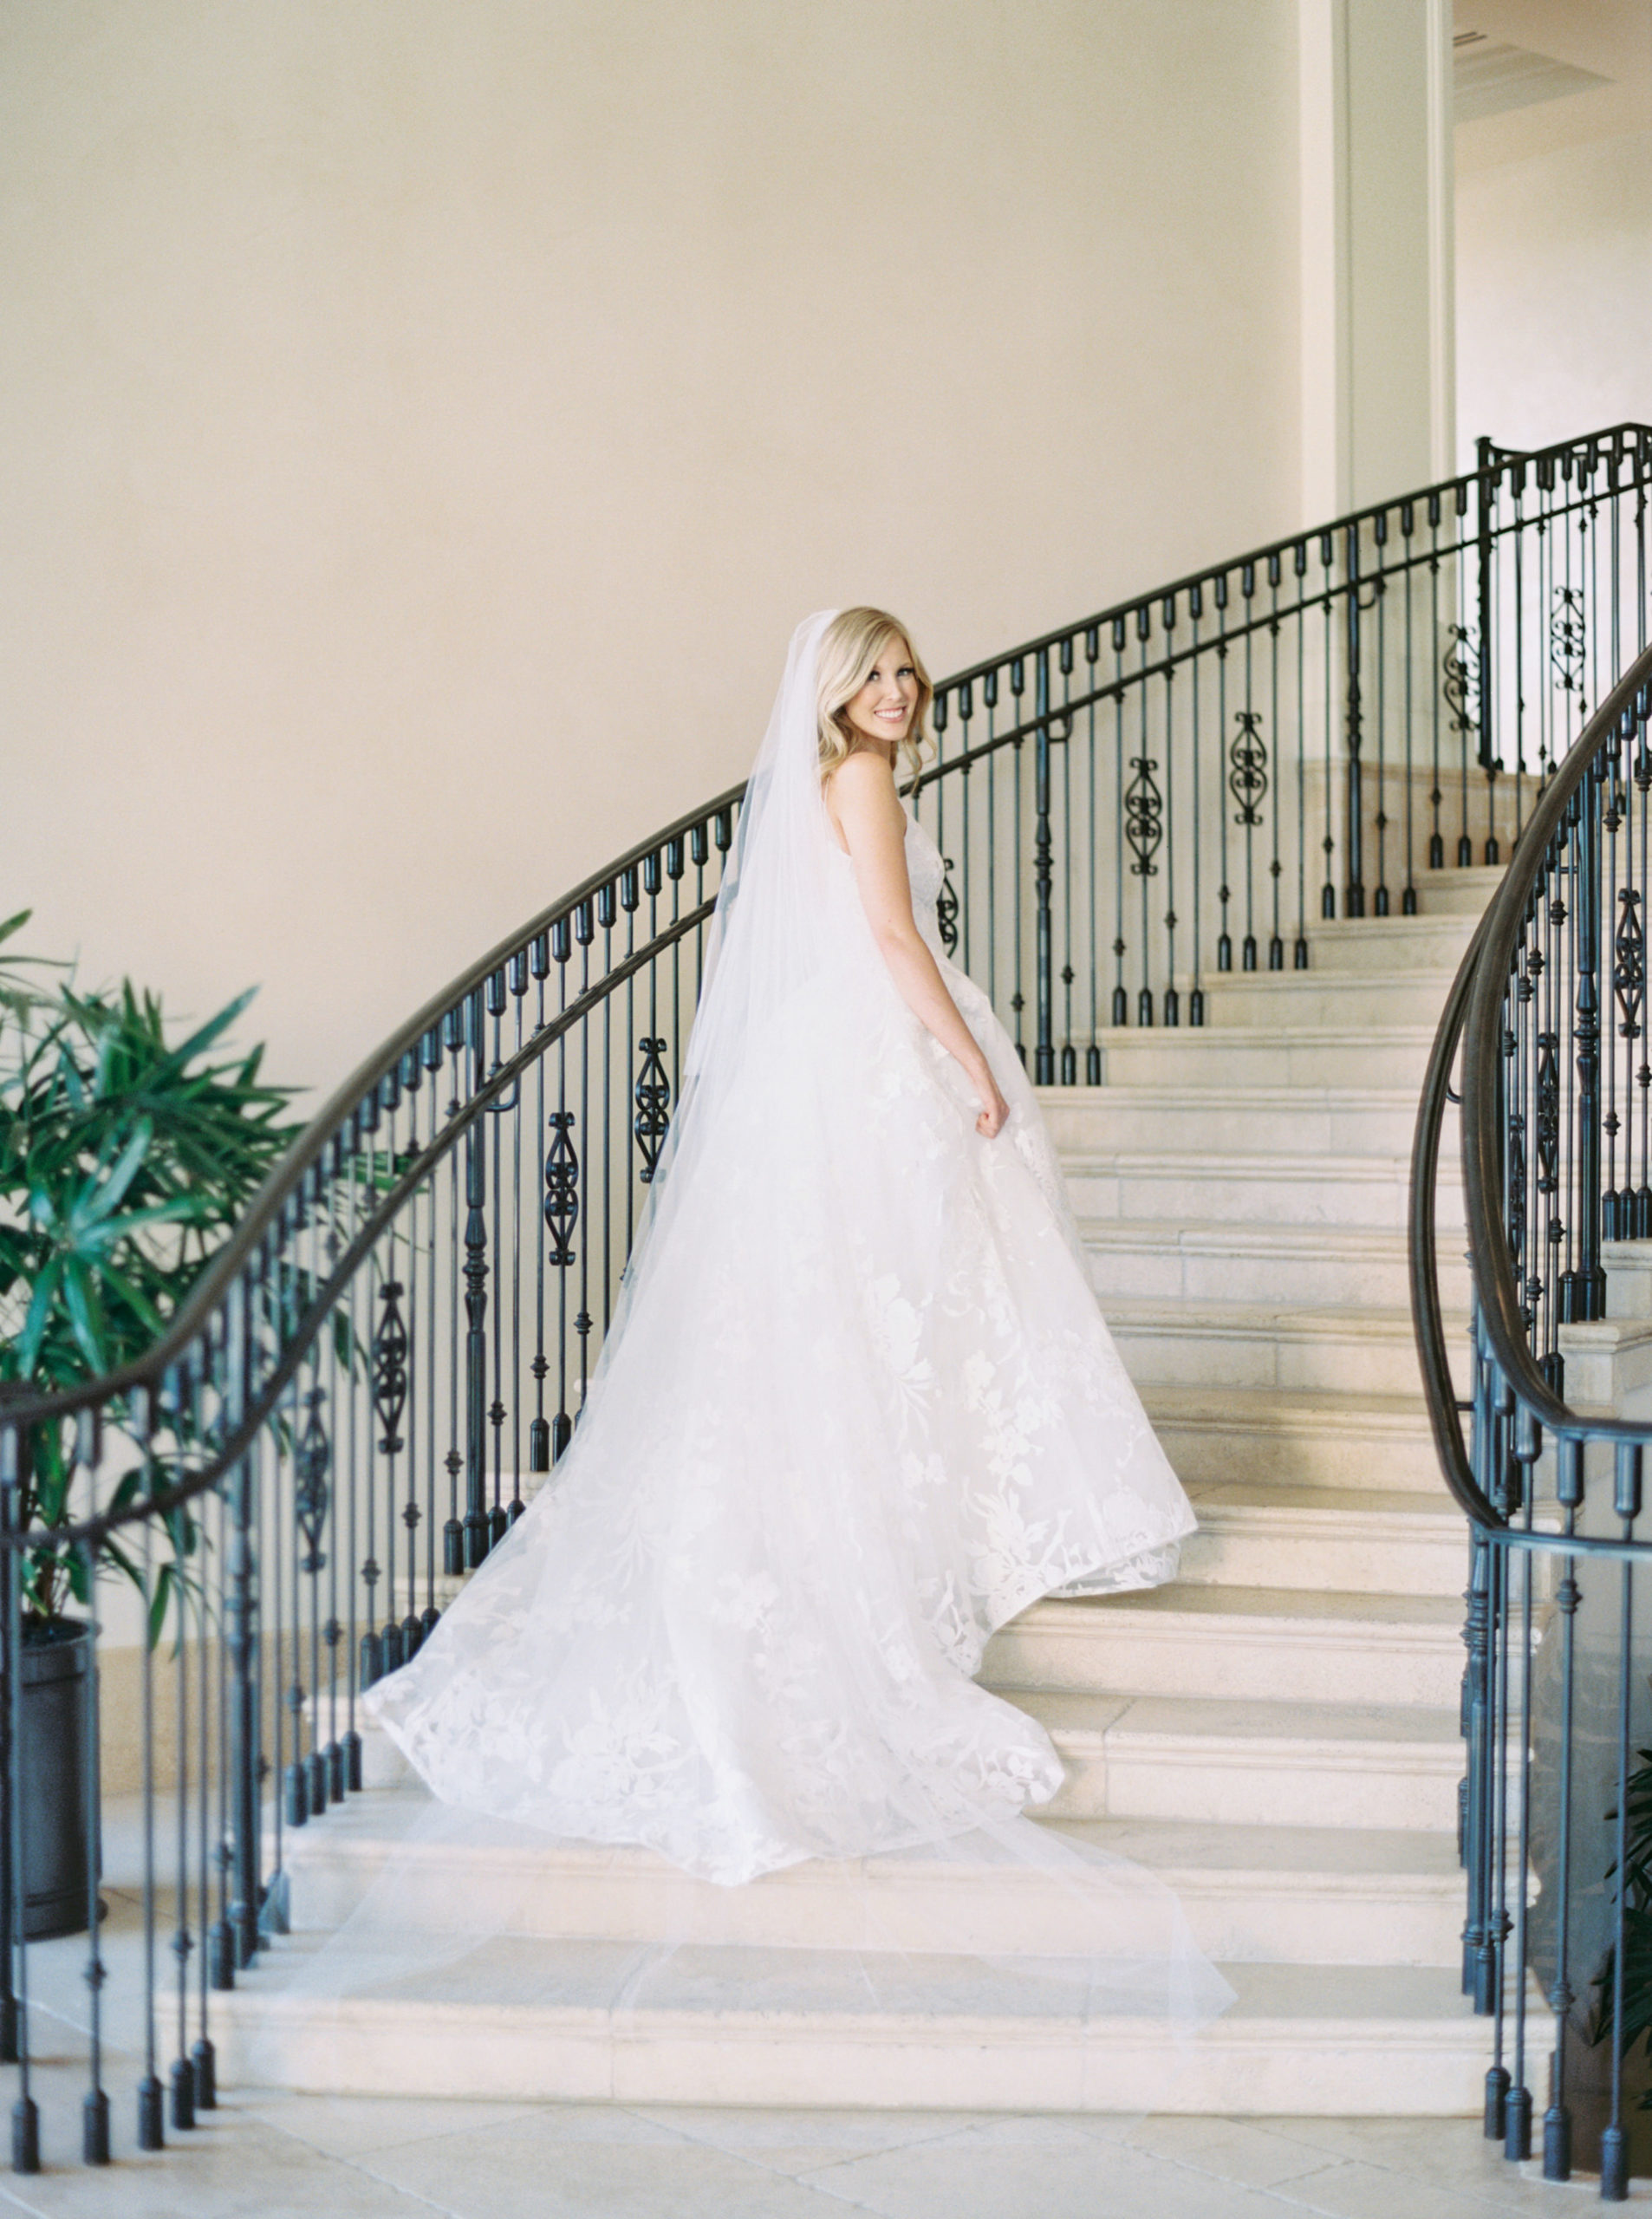 The stunning bride walking up the sweeping double staircase with iron-wrought railing at the Lakeside Country Club taken by Mackenzie Reiter Photography